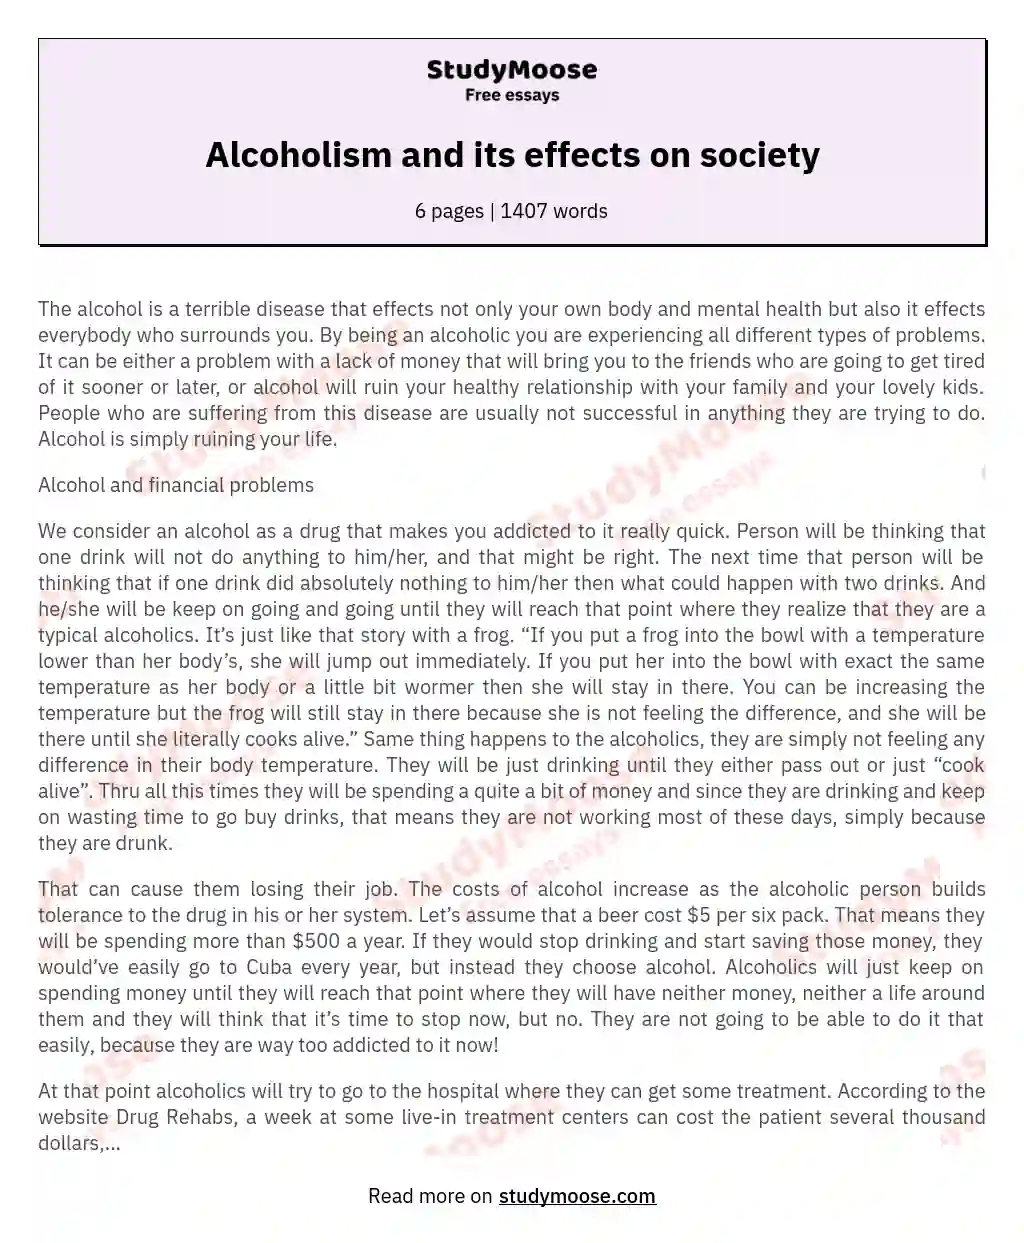 Alcoholism and its effects on society